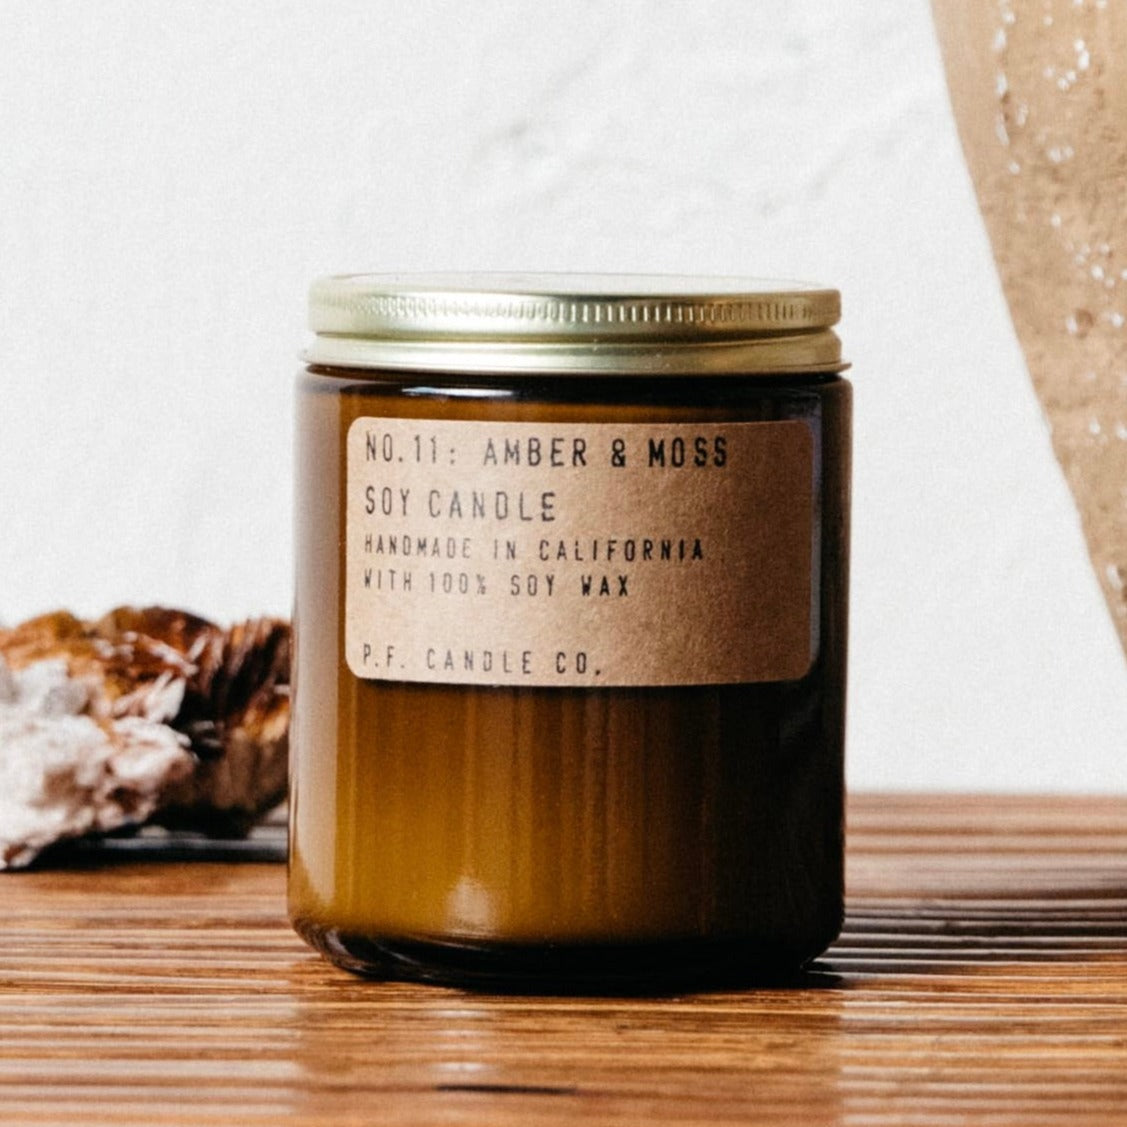 P.F. Candle Co | Amber & Moss | Soy Candle PF CANDLE CO 